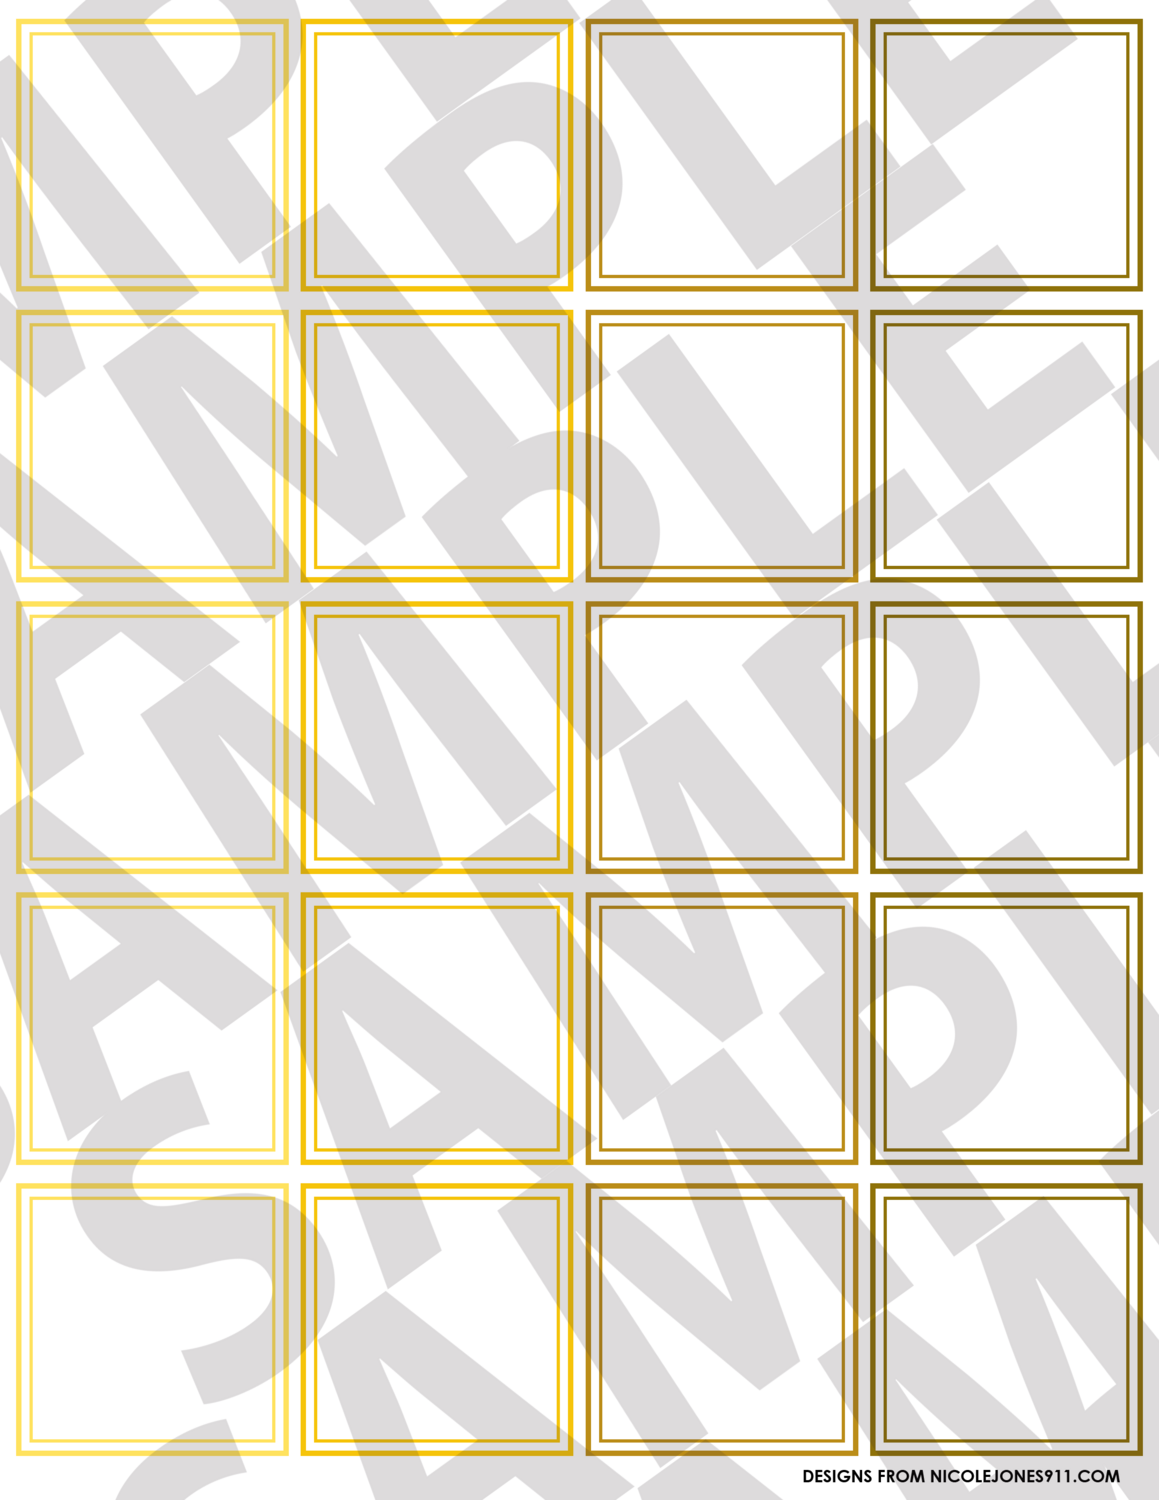 More Yellow - Squares